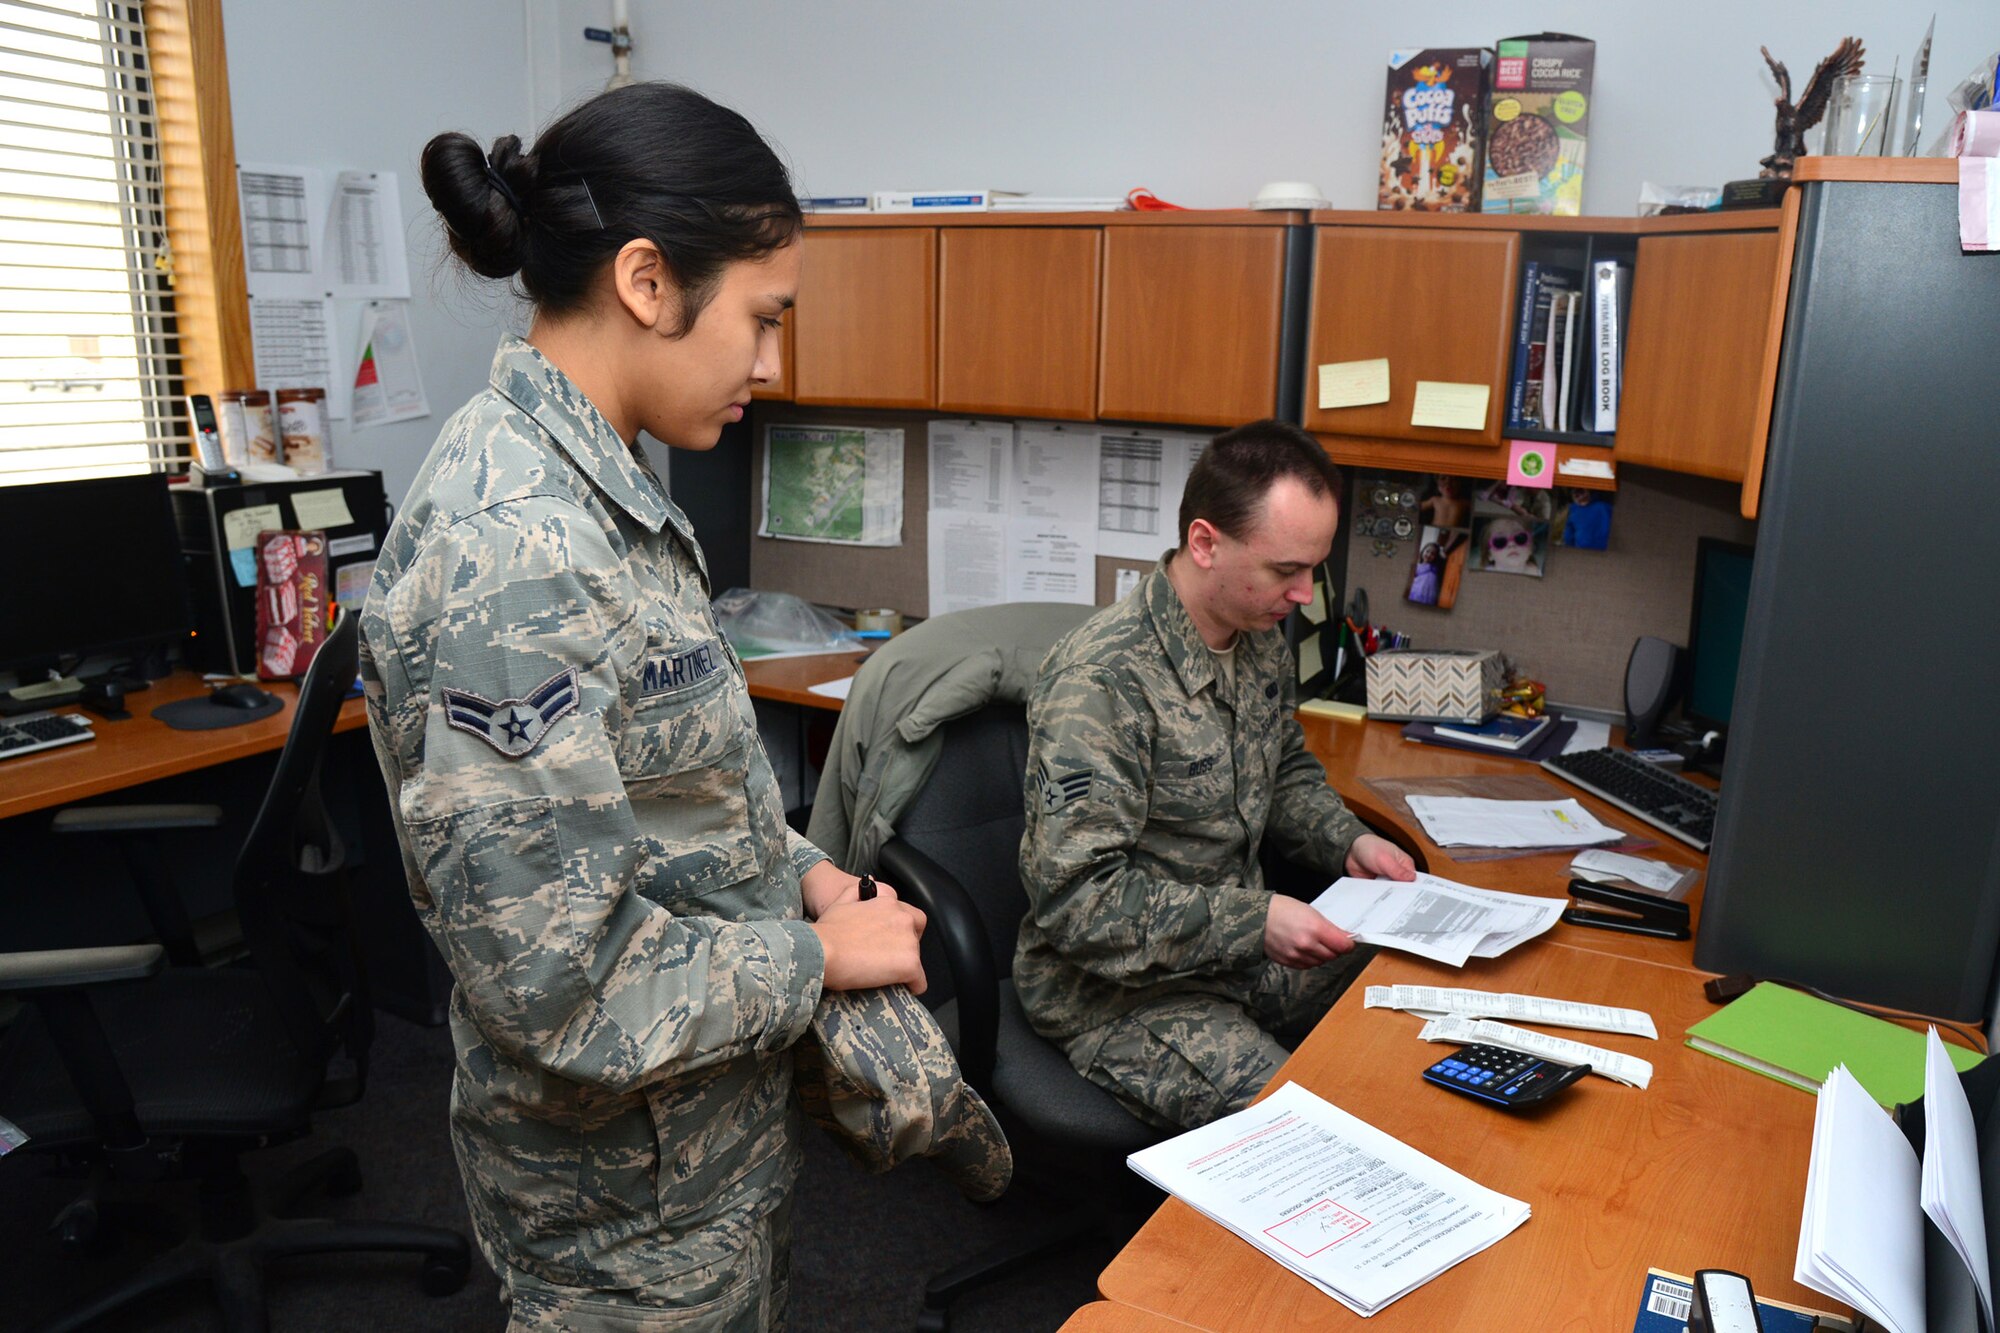 Airman 1st Class Marissa Martinez, 341st Force Support Squadron missile chef, returns from a three-day tour in the missile field Oct. 4, 2015, at Malmstrom Air Force Base, Mont. Martinez is responsible for preparing meals for individuals in the field and collecting and returning the proper amount of money to the office. (U.S. Air Force photo/Airman Daniel Brosam)